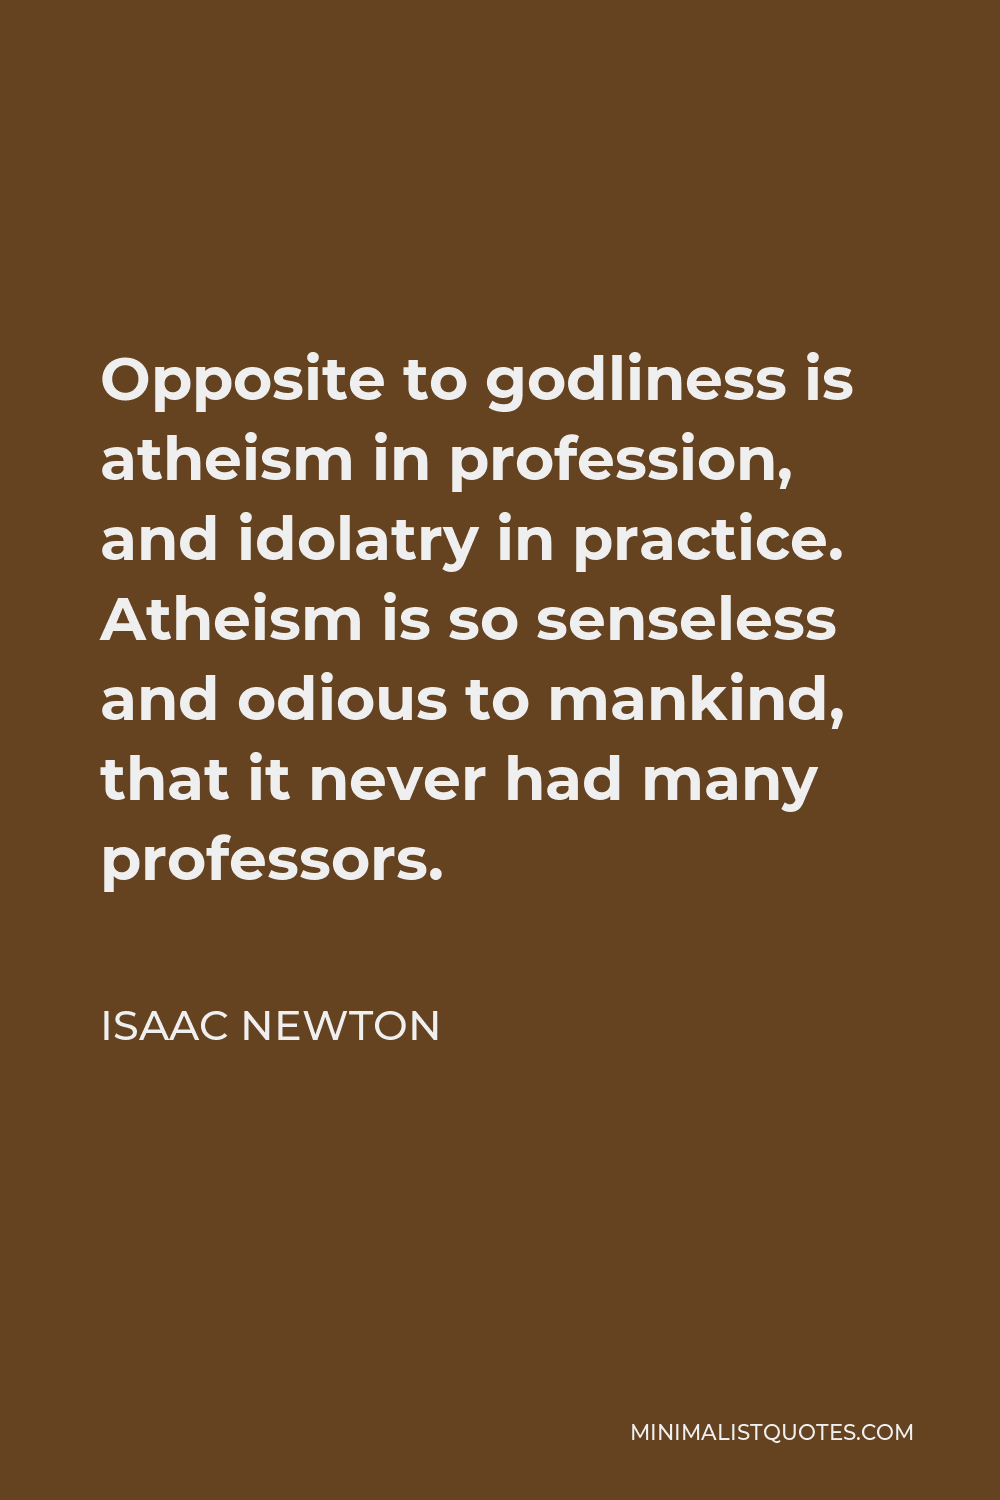 Isaac Newton Quote - Opposite to godliness is atheism in profession, and idolatry in practice. Atheism is so senseless and odious to mankind, that it never had many professors.